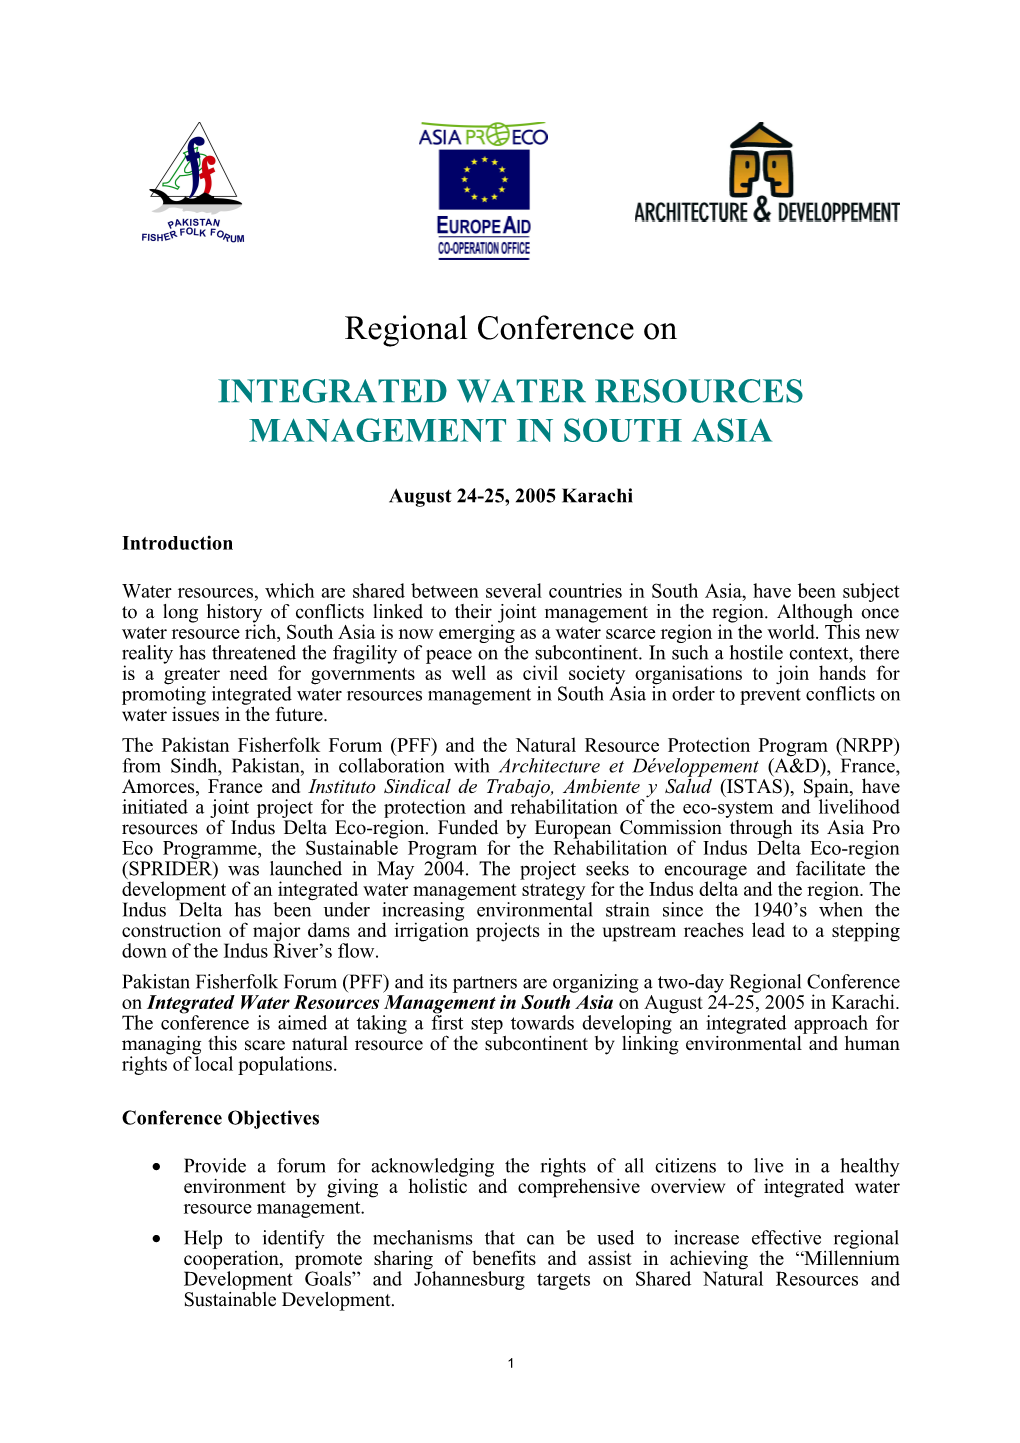 Integrated Water Resources Management in South Asia